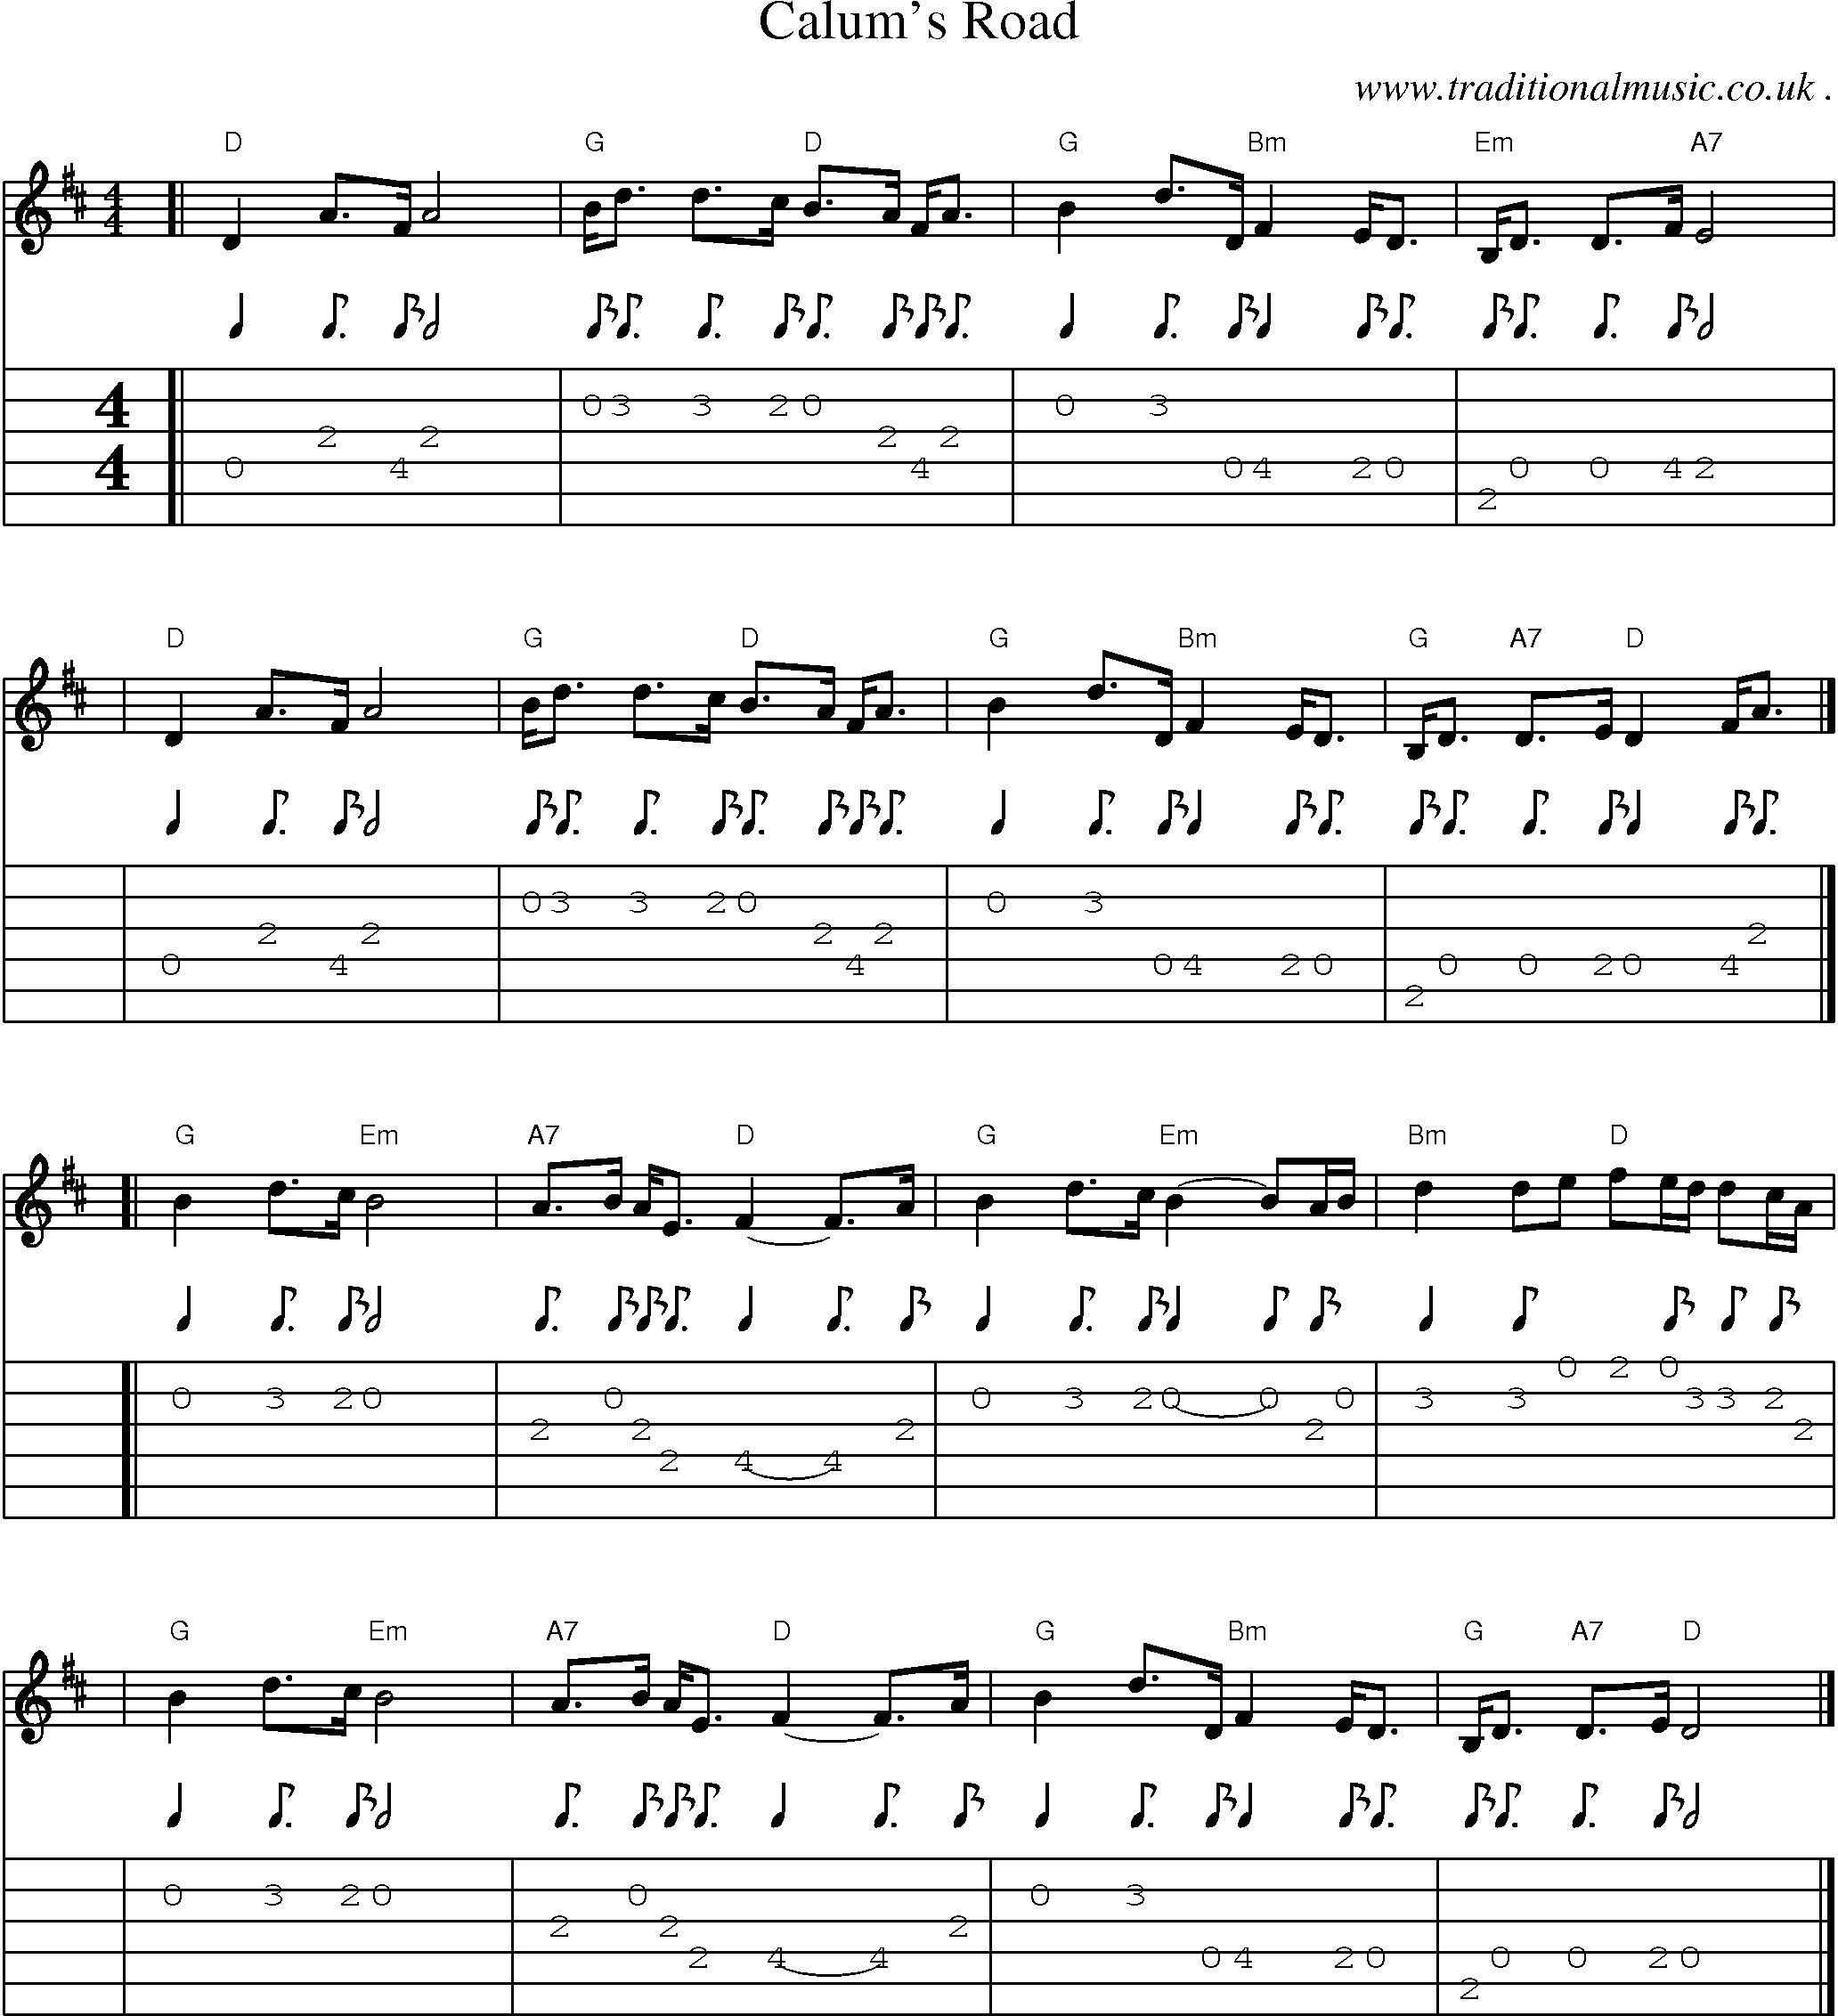 Sheet-music  score, Chords and Guitar Tabs for Calums Road